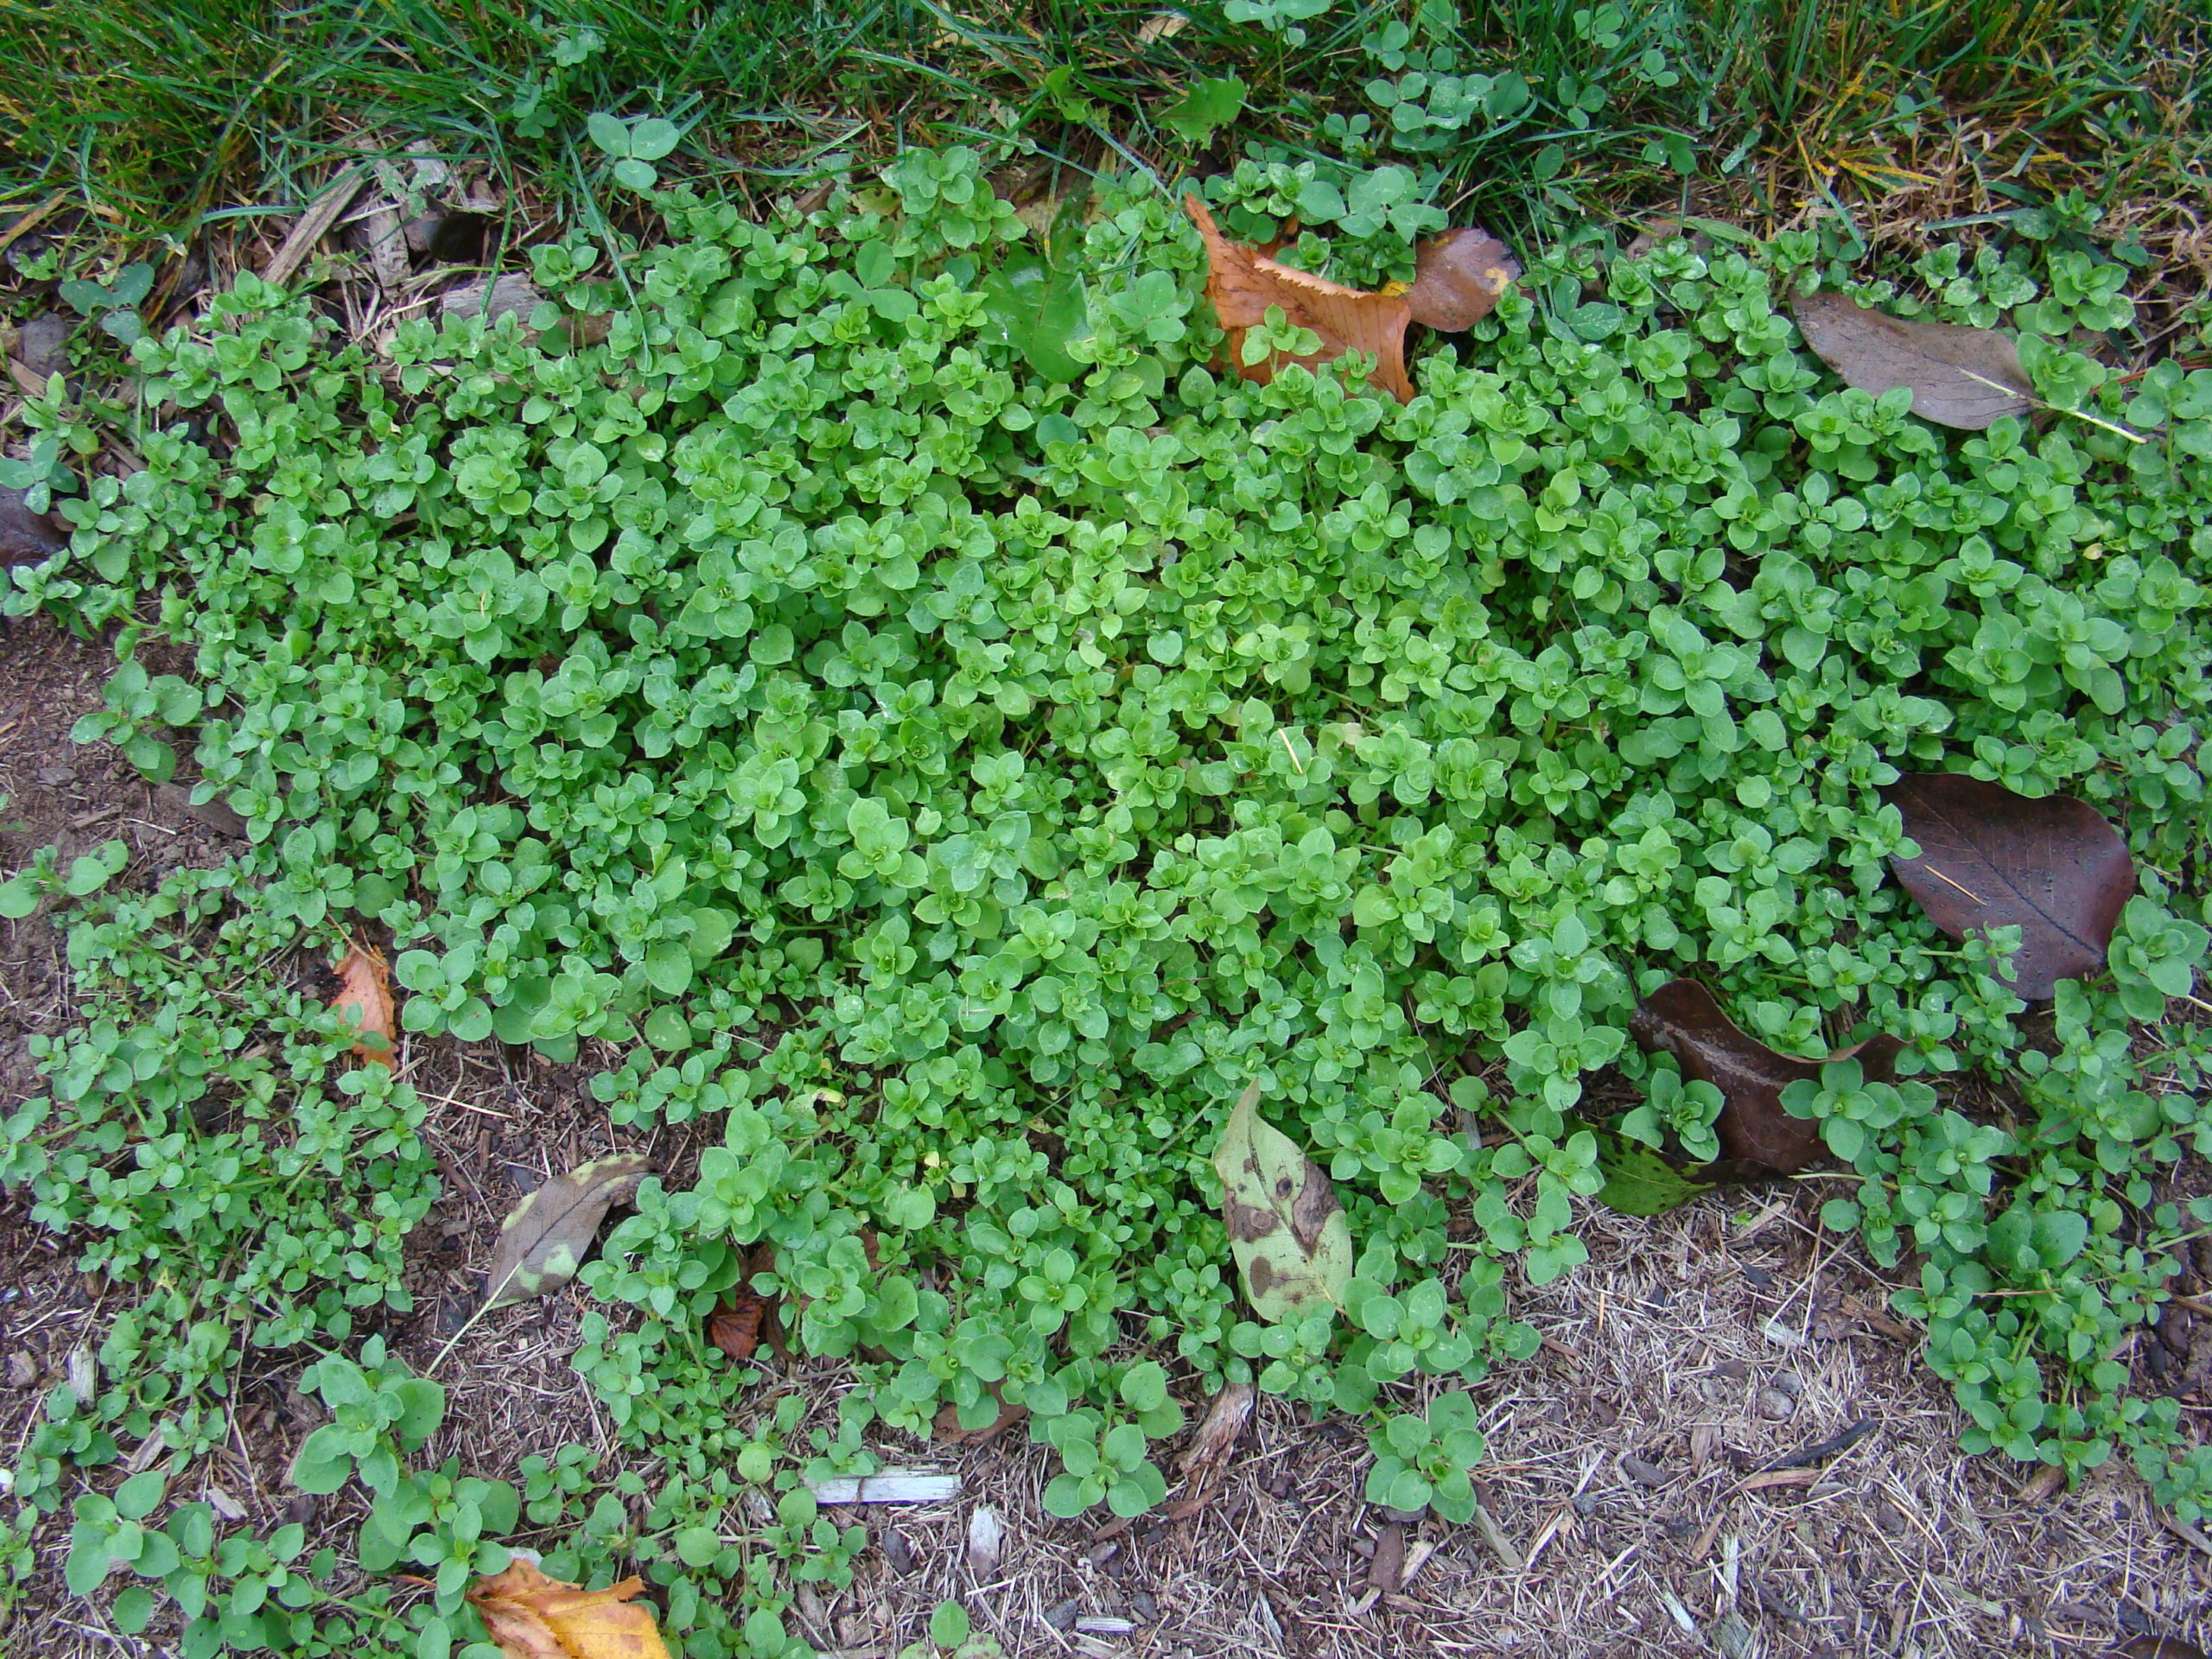 Chickweed can be used in salads and has medicinal uses, but it can also be a major problem in lawns. It is easily hand pulled and should be removed in the winter before it flowers and sets seed.